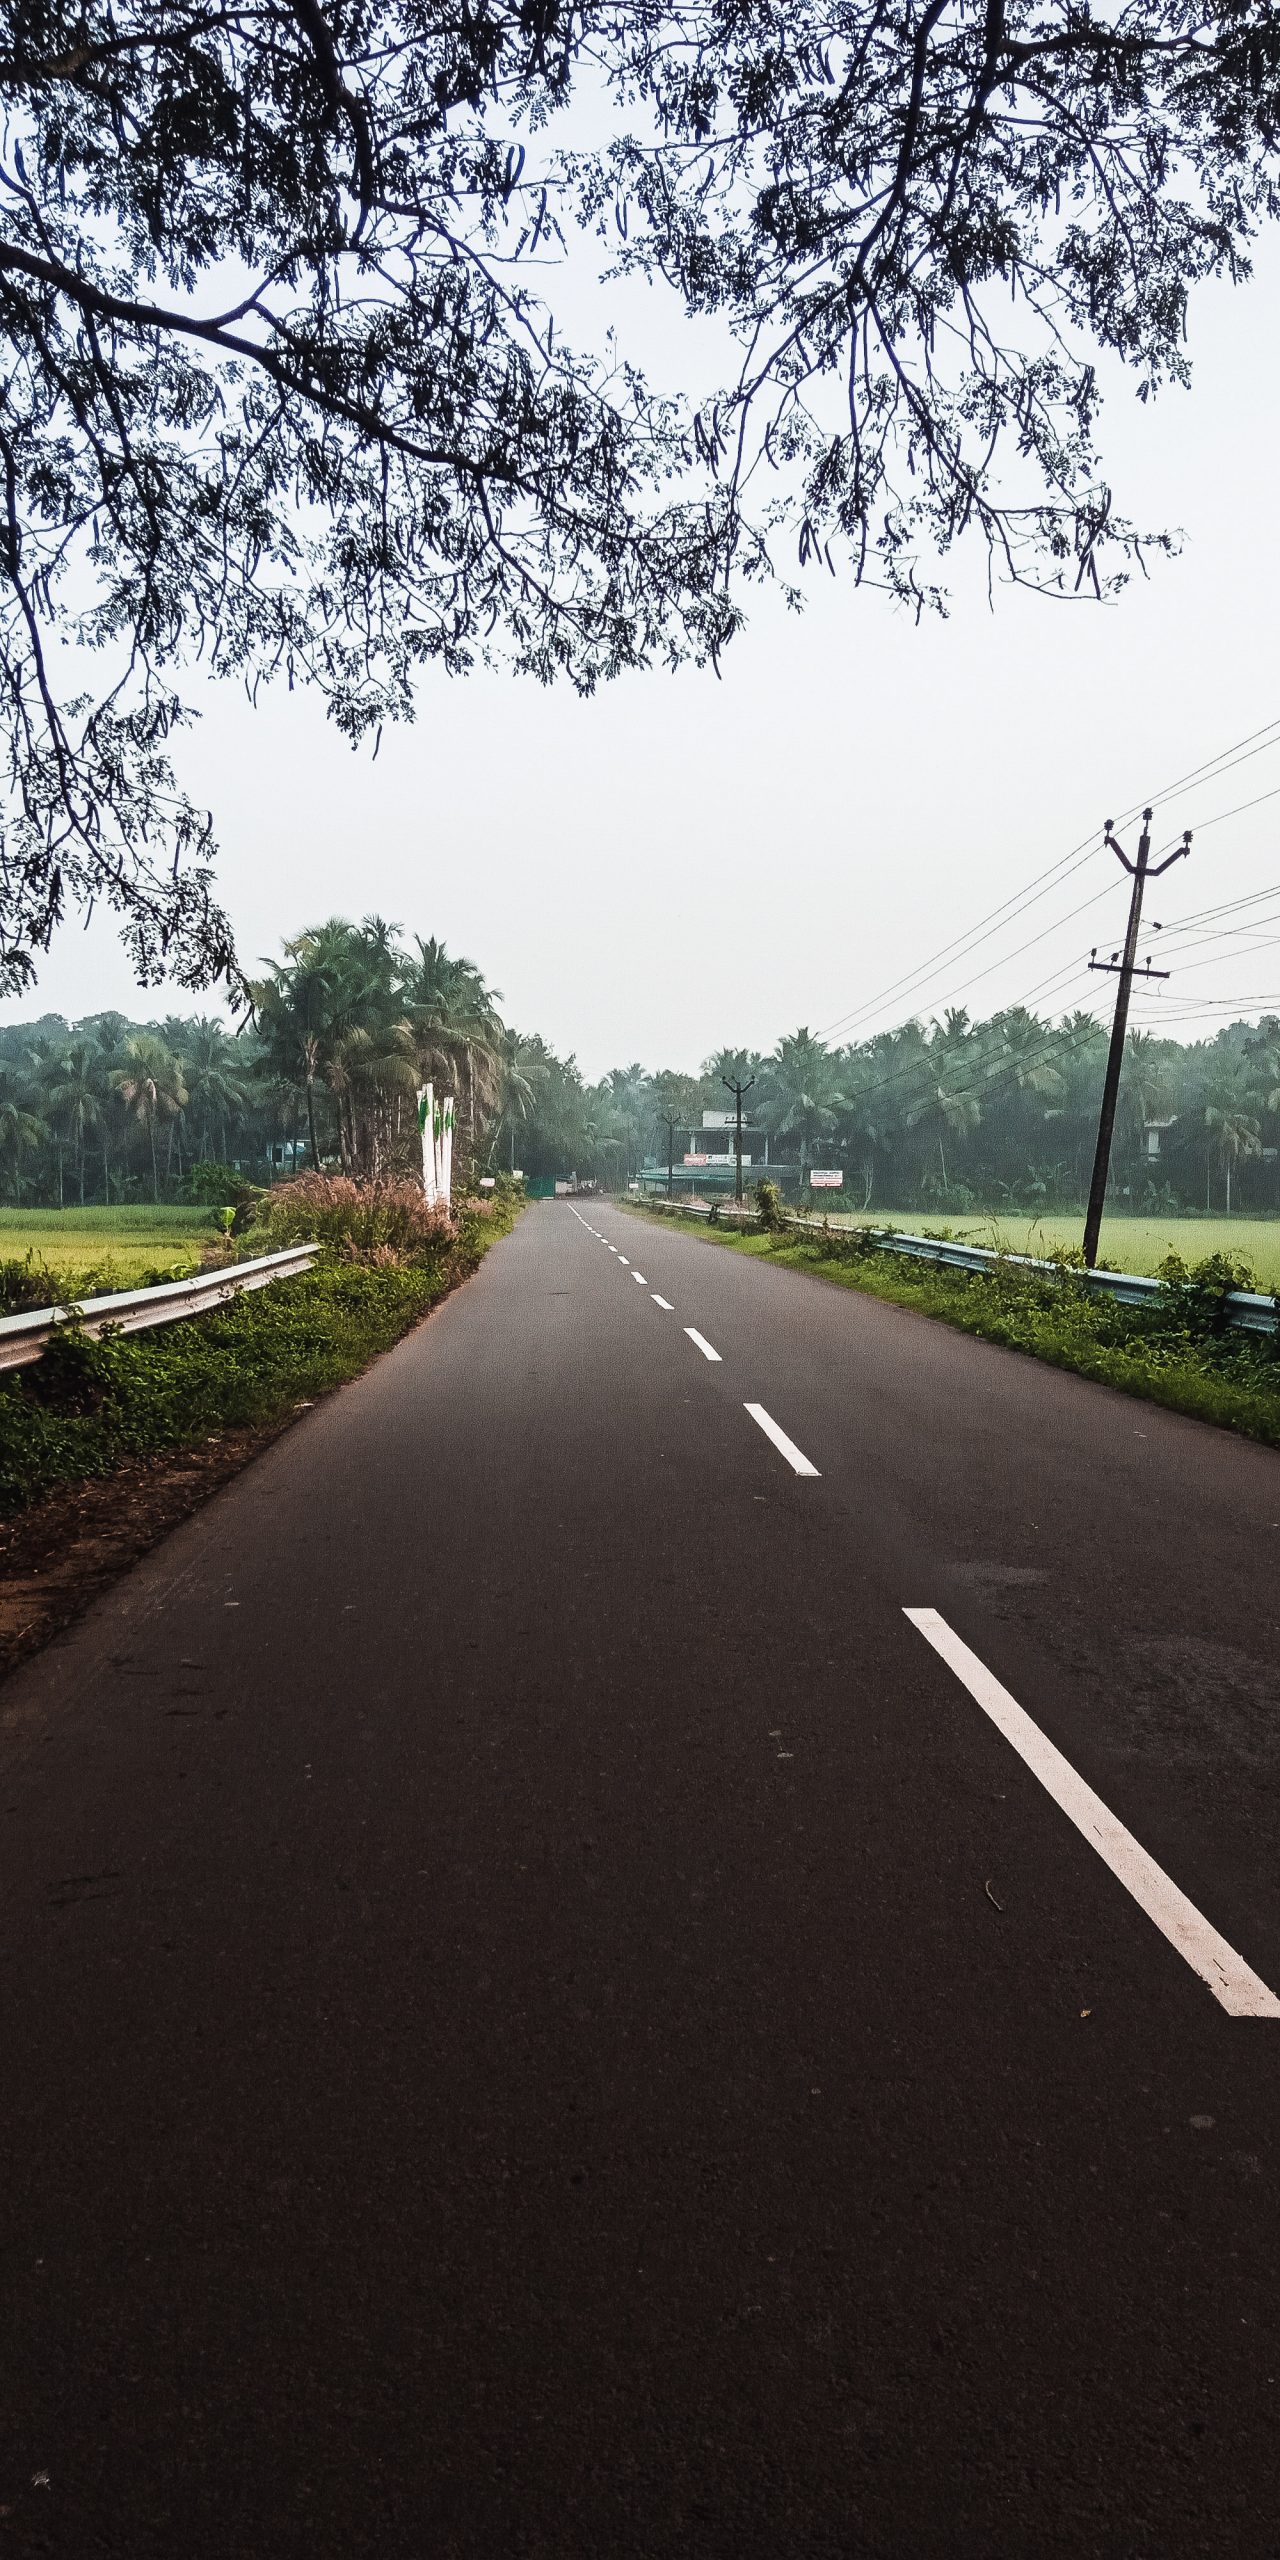 Road and the nature.